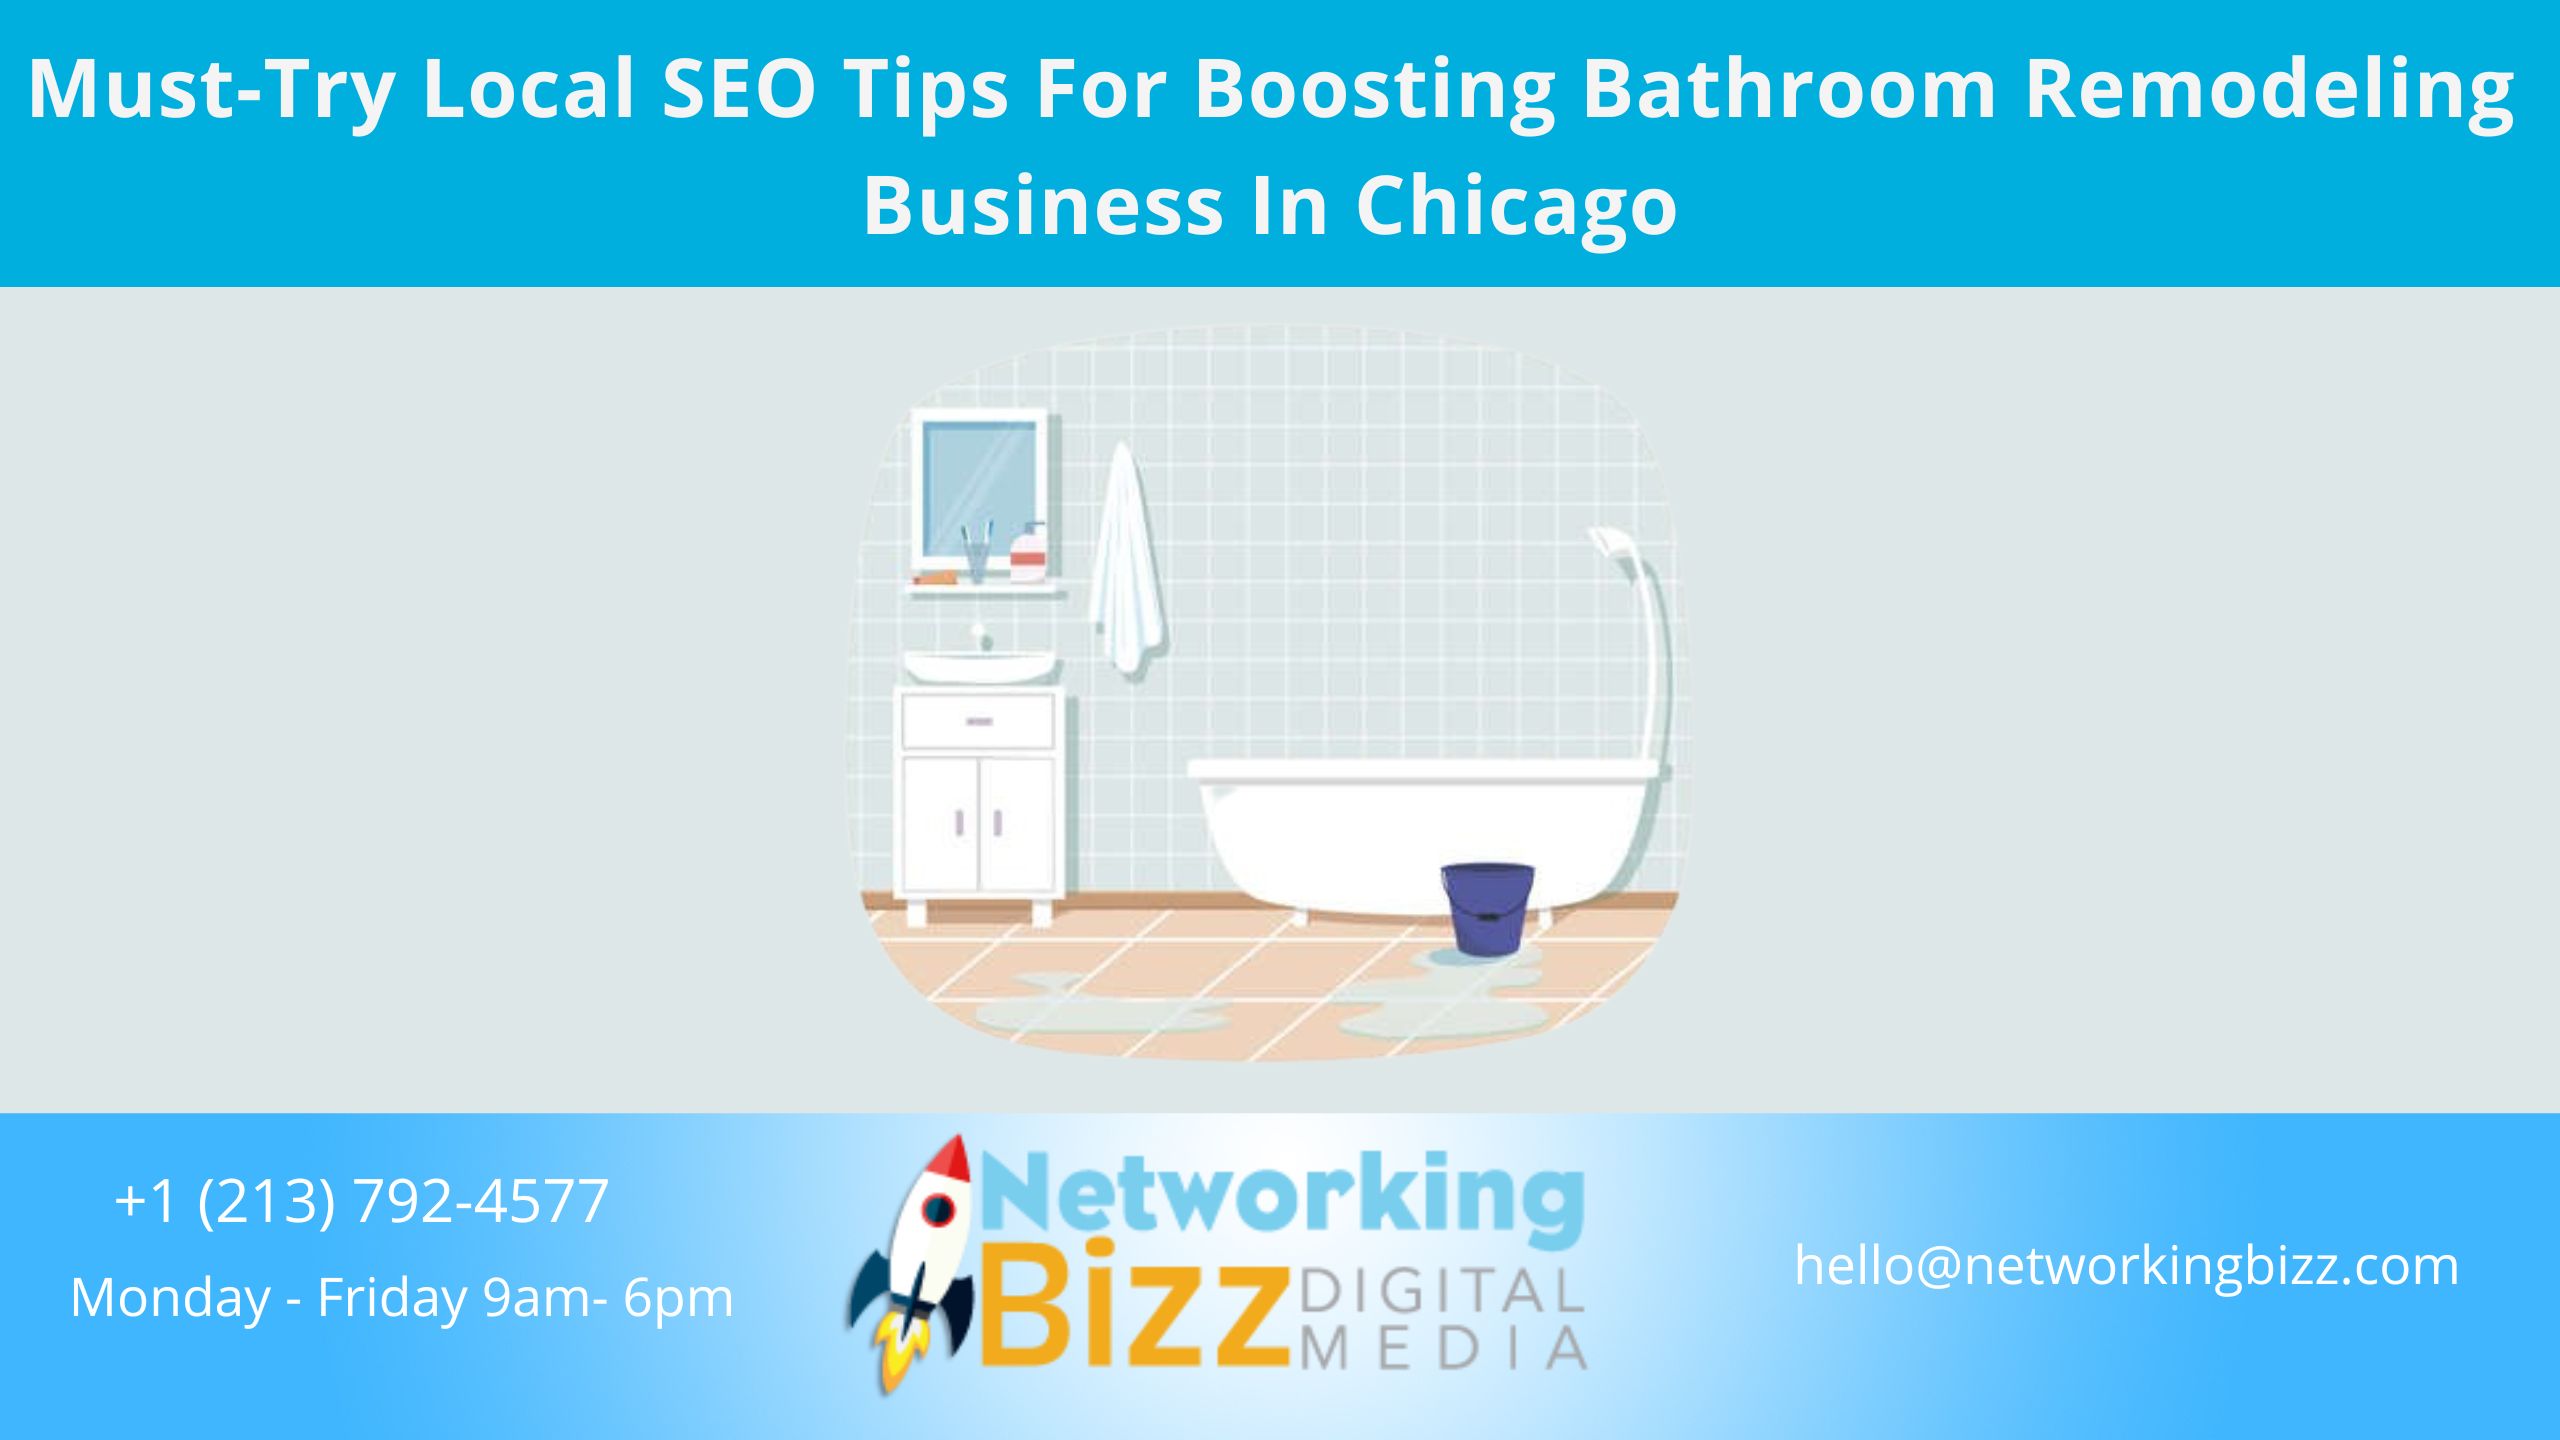 Must-Try Local SEO Tips For Boosting Bathroom Remodeling Business In Chicago